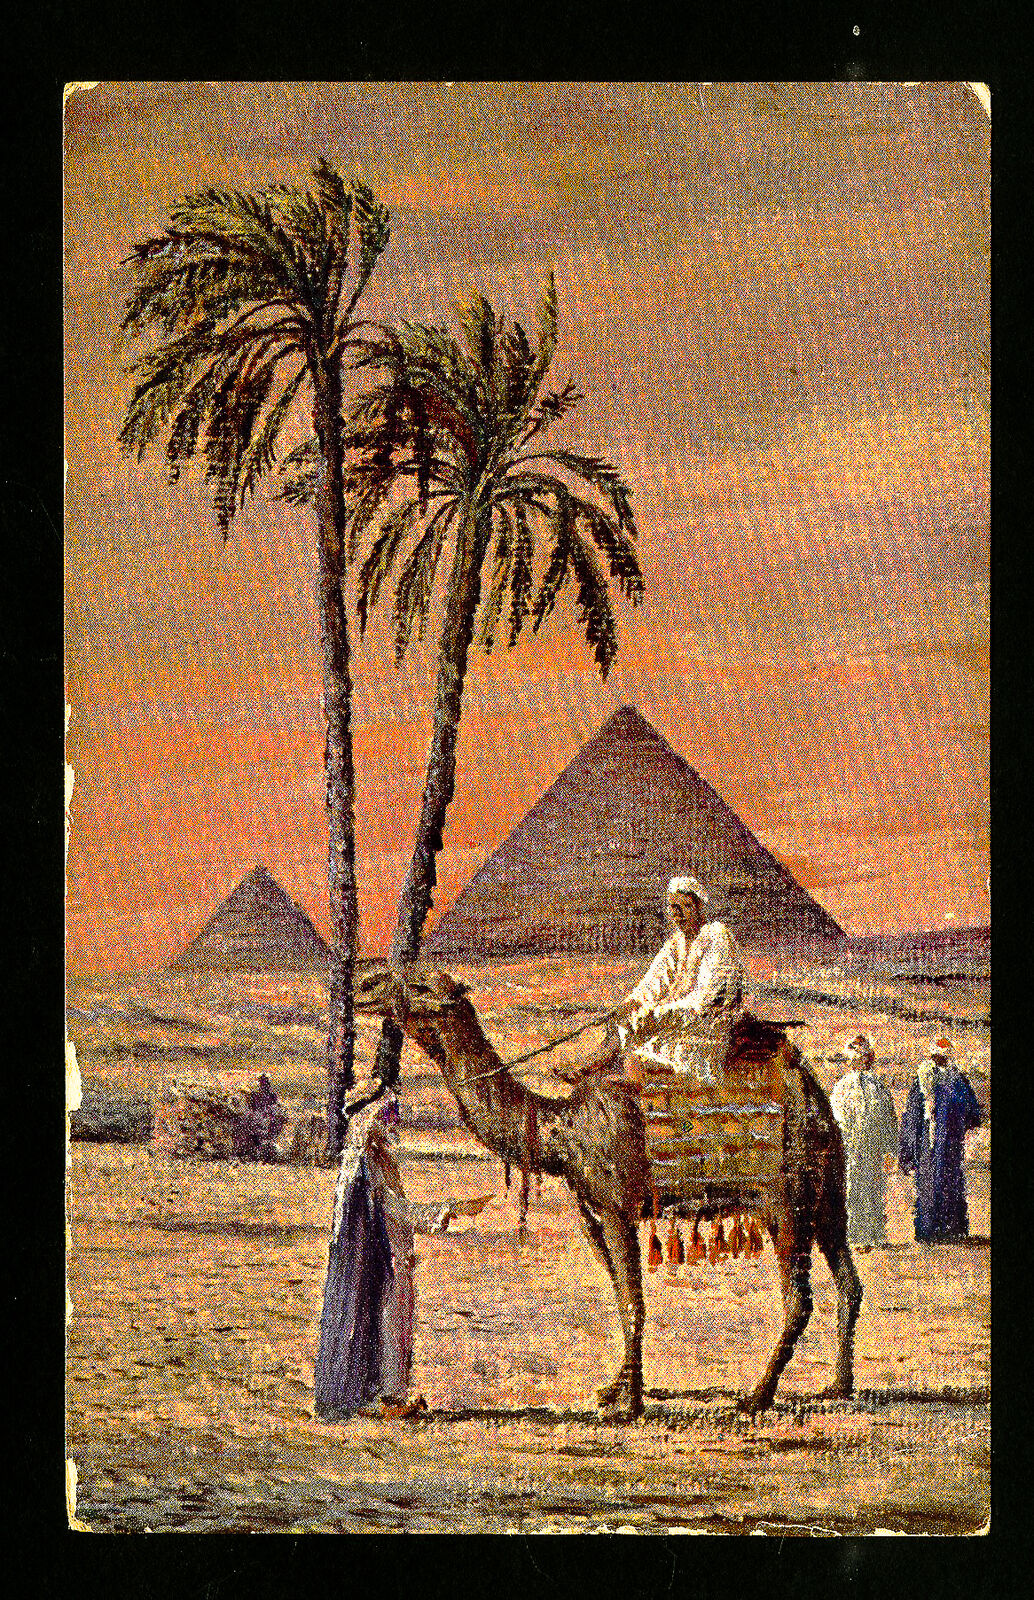 Egypt 1930 Pyramid And Camel Stamped Postcard